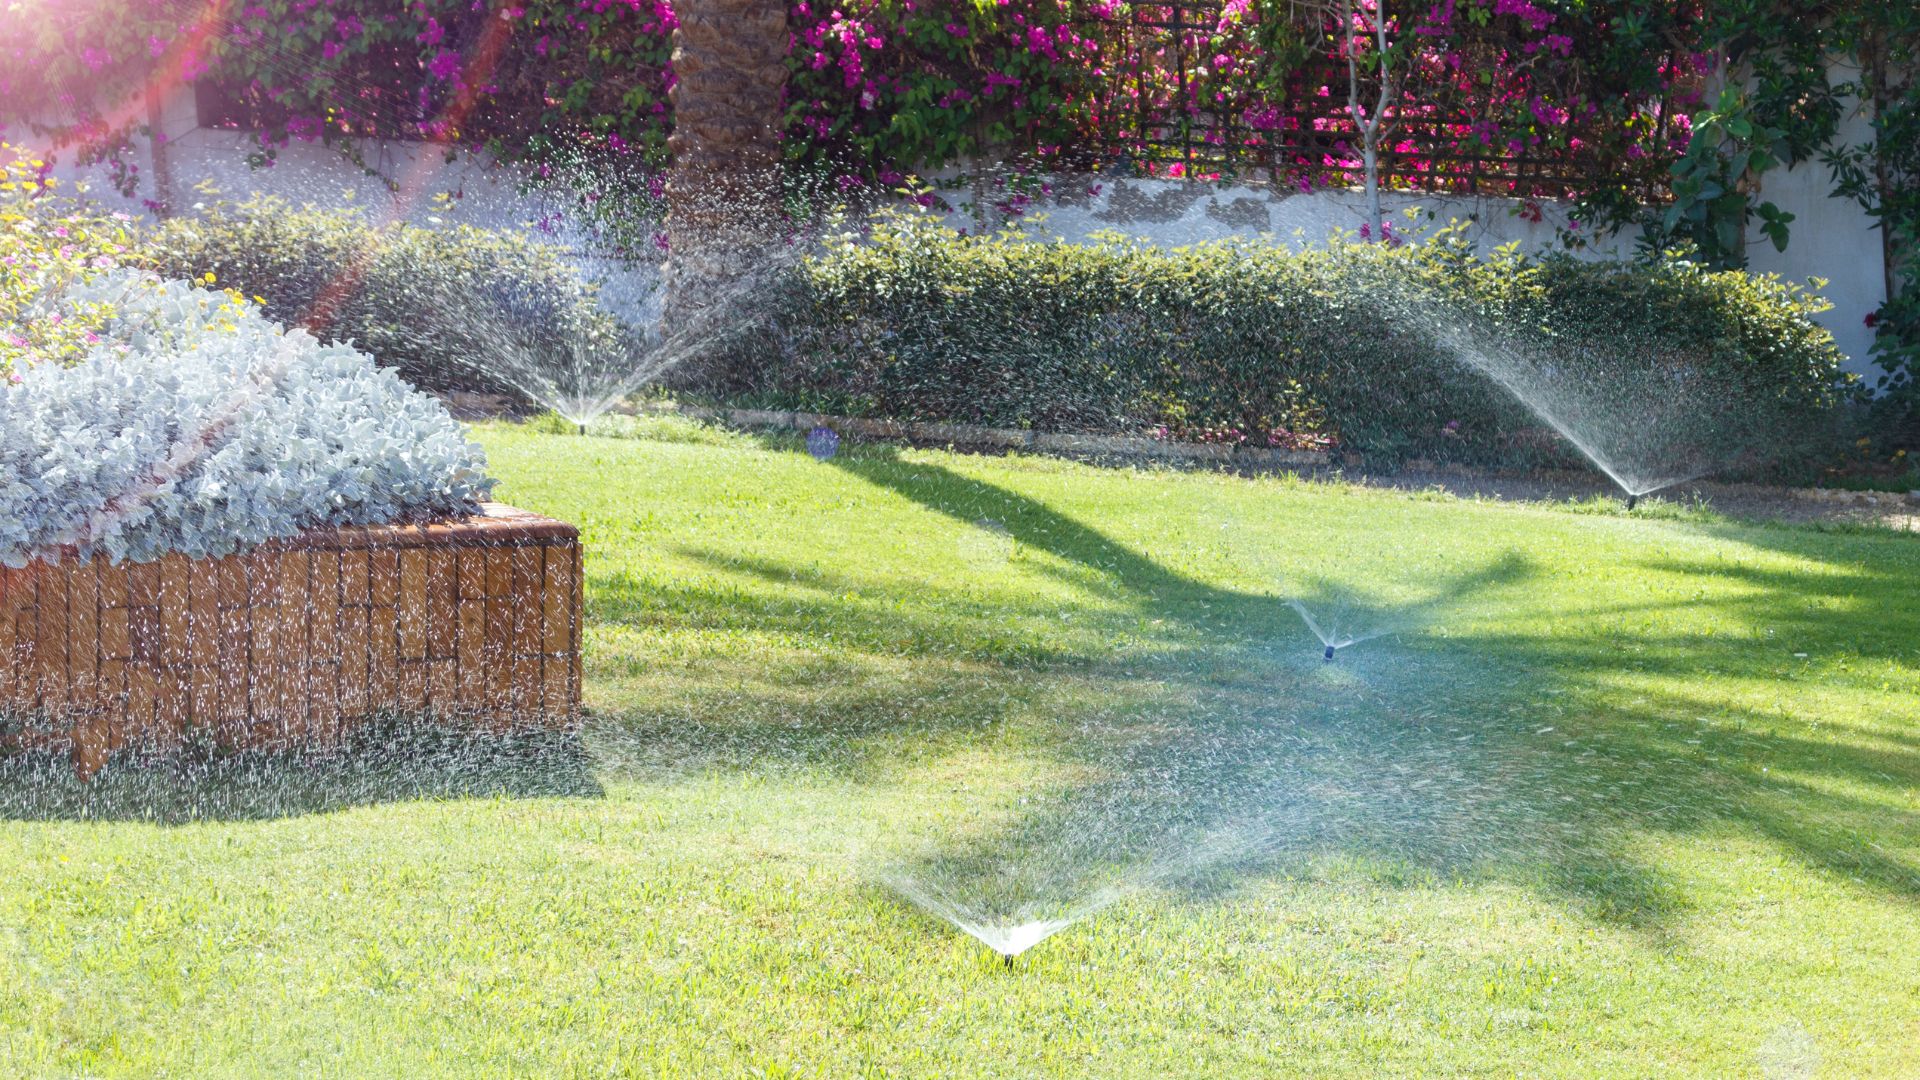 A lawn being watered with sprinklers.